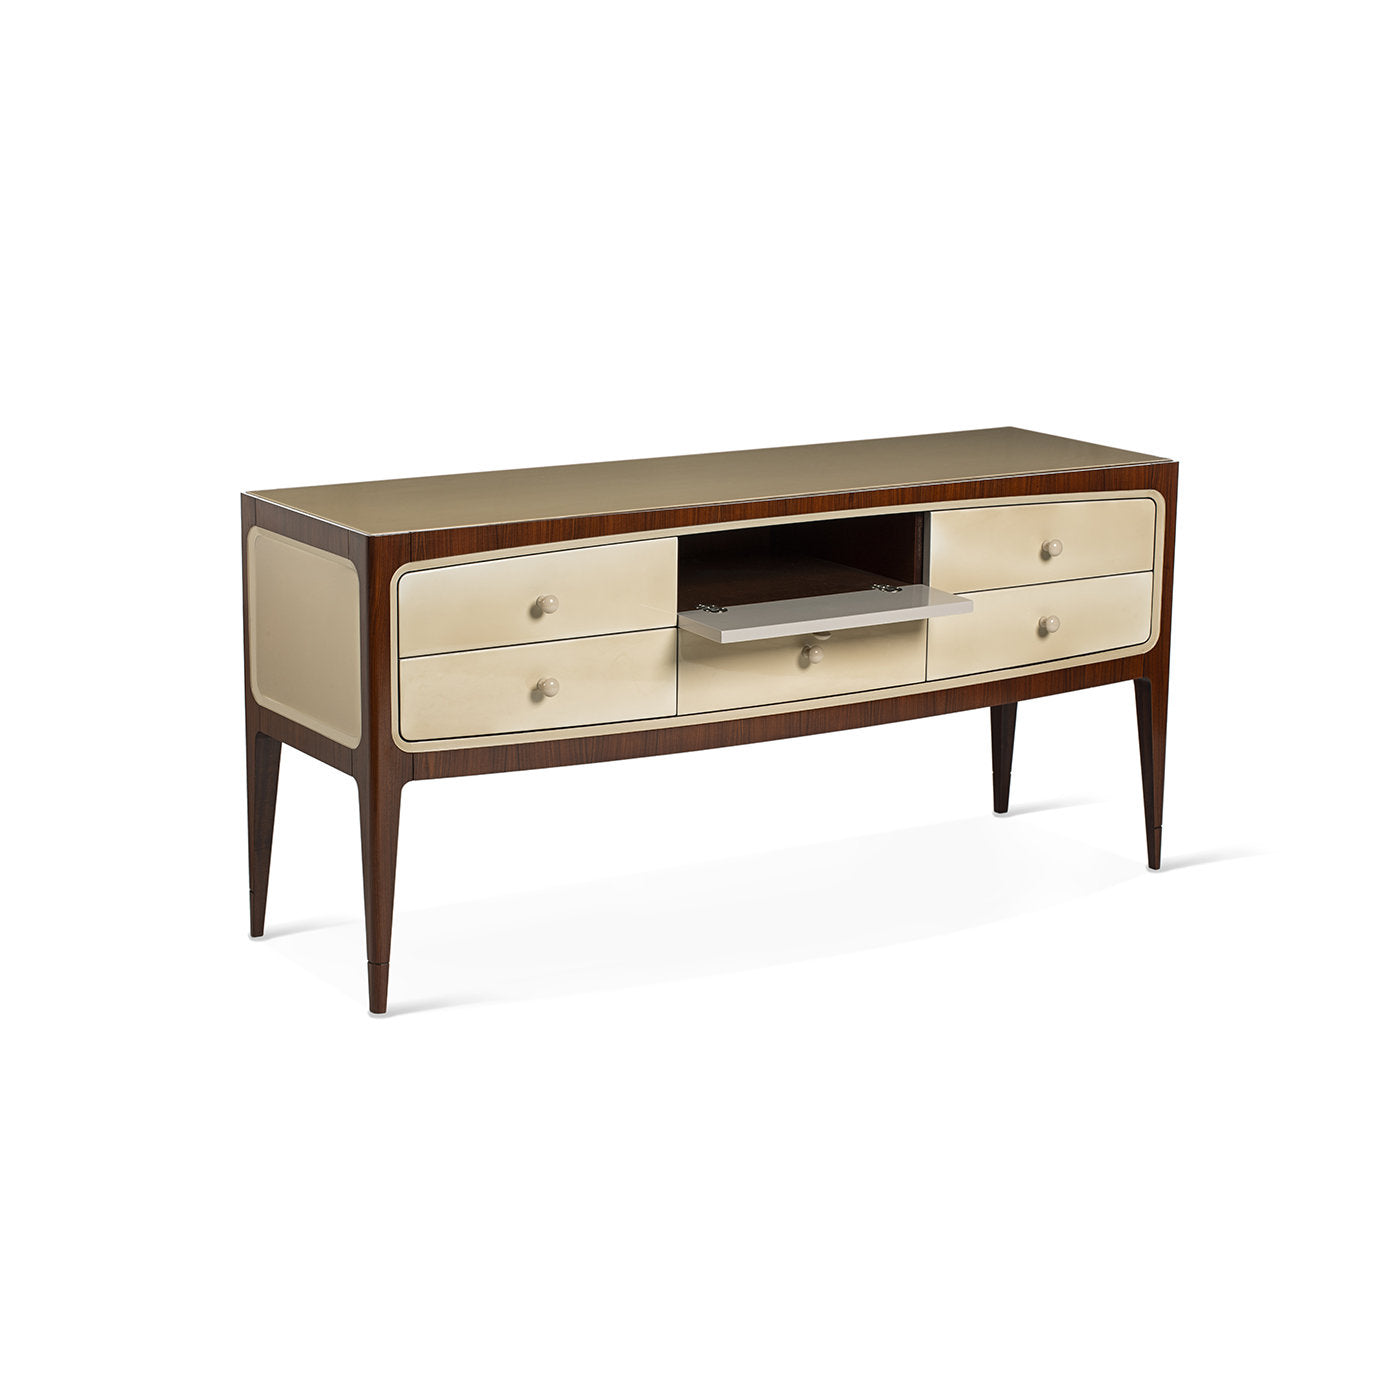 60s Style Beechwood Sideboard with Drawers 8712 - Alternative view 2